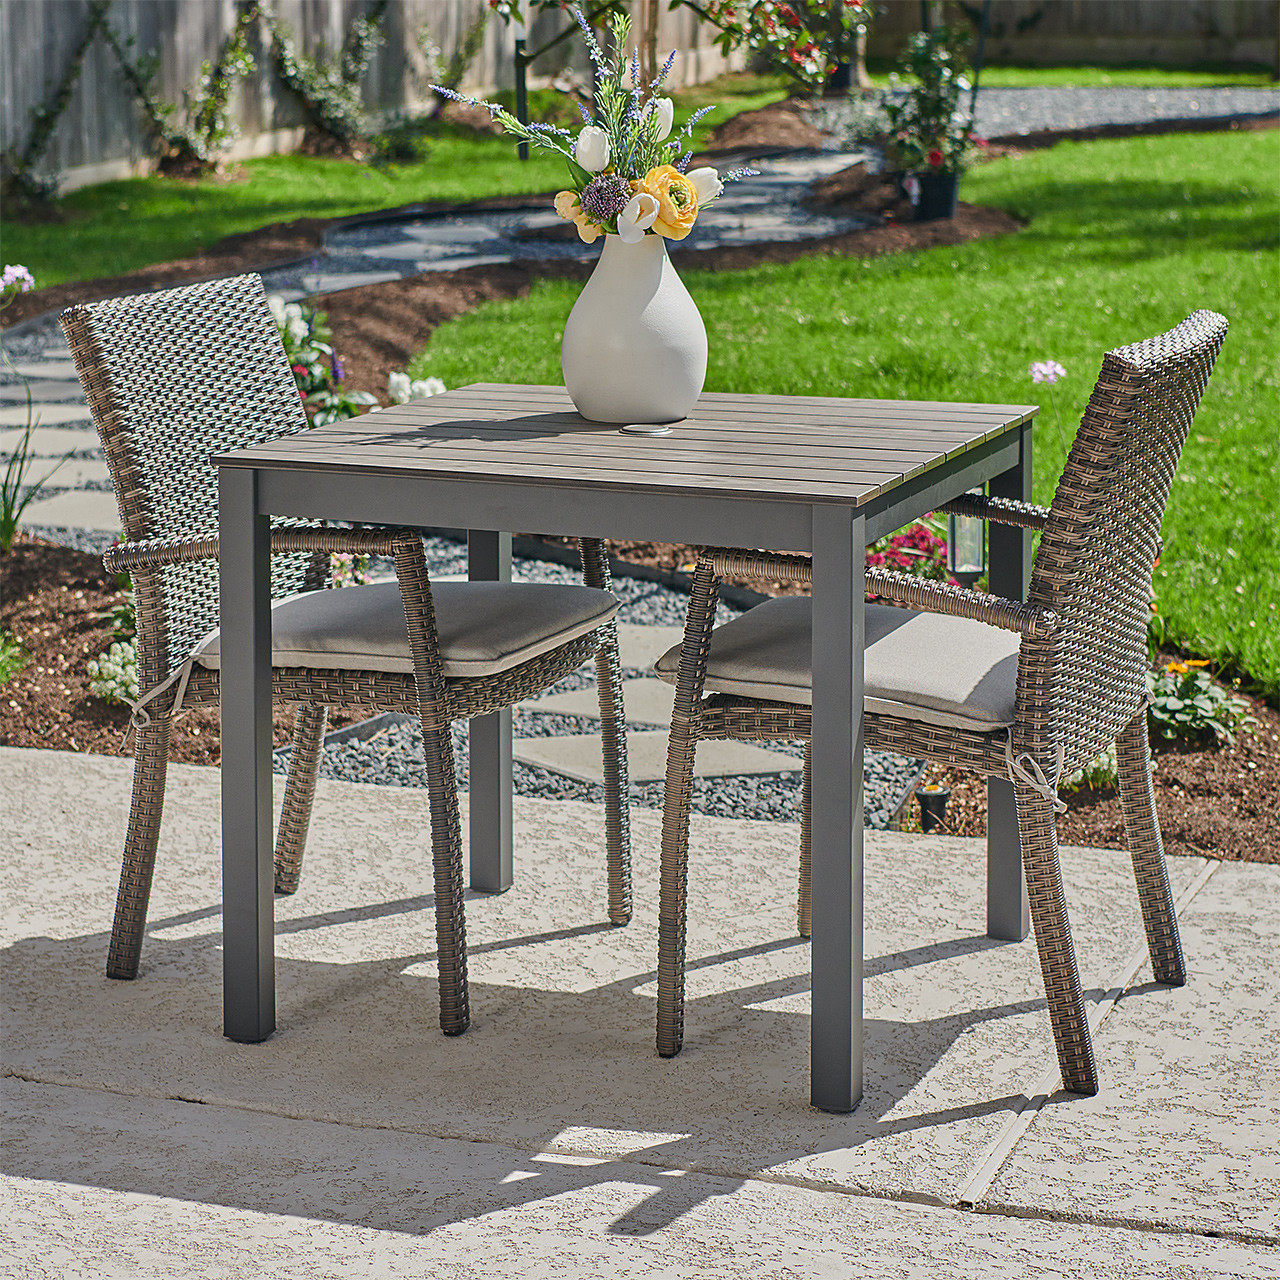 Contempo Husk Outdoor Wicker with Cushions 3 Piece Bistro Set + 33 in. Sq. Table